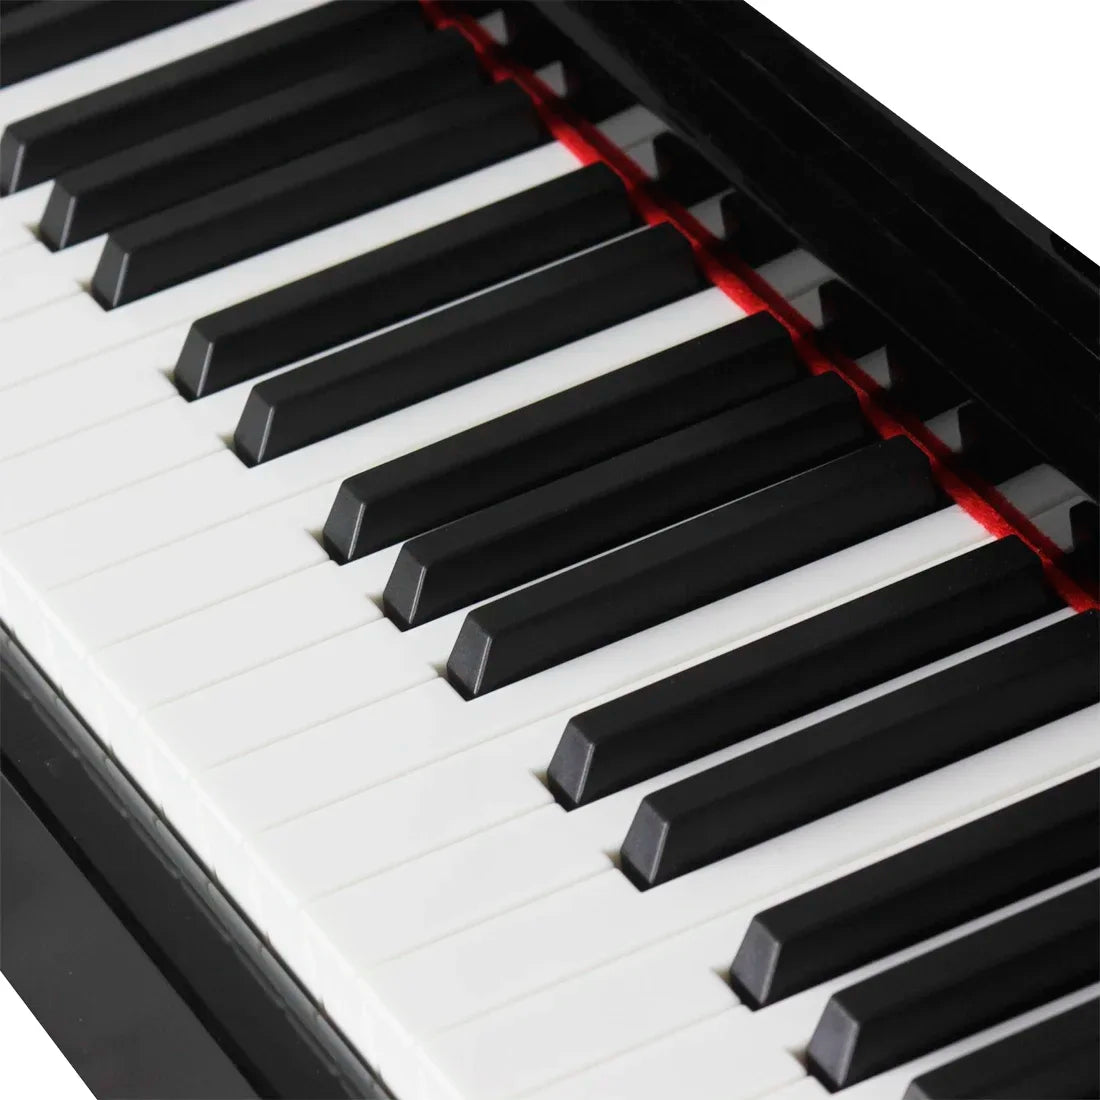 SLADE 88 Keys Upright Piano Digital Electronic Piano Weighted Keyboard Professional Keyboard Instrument for Beginner Practice